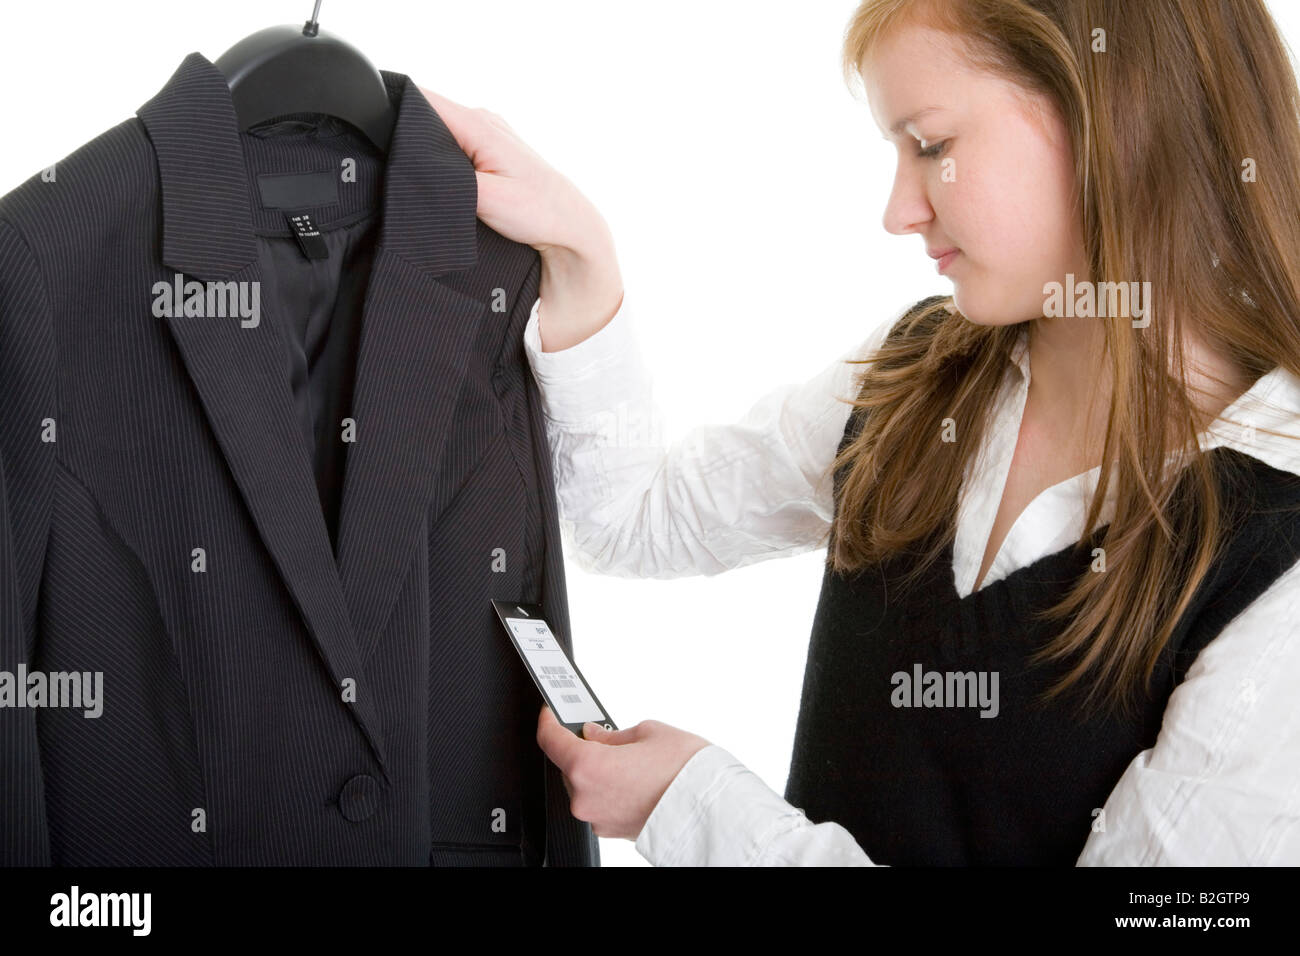 office assistant female suit jacketts business woman secretary Stock Photo